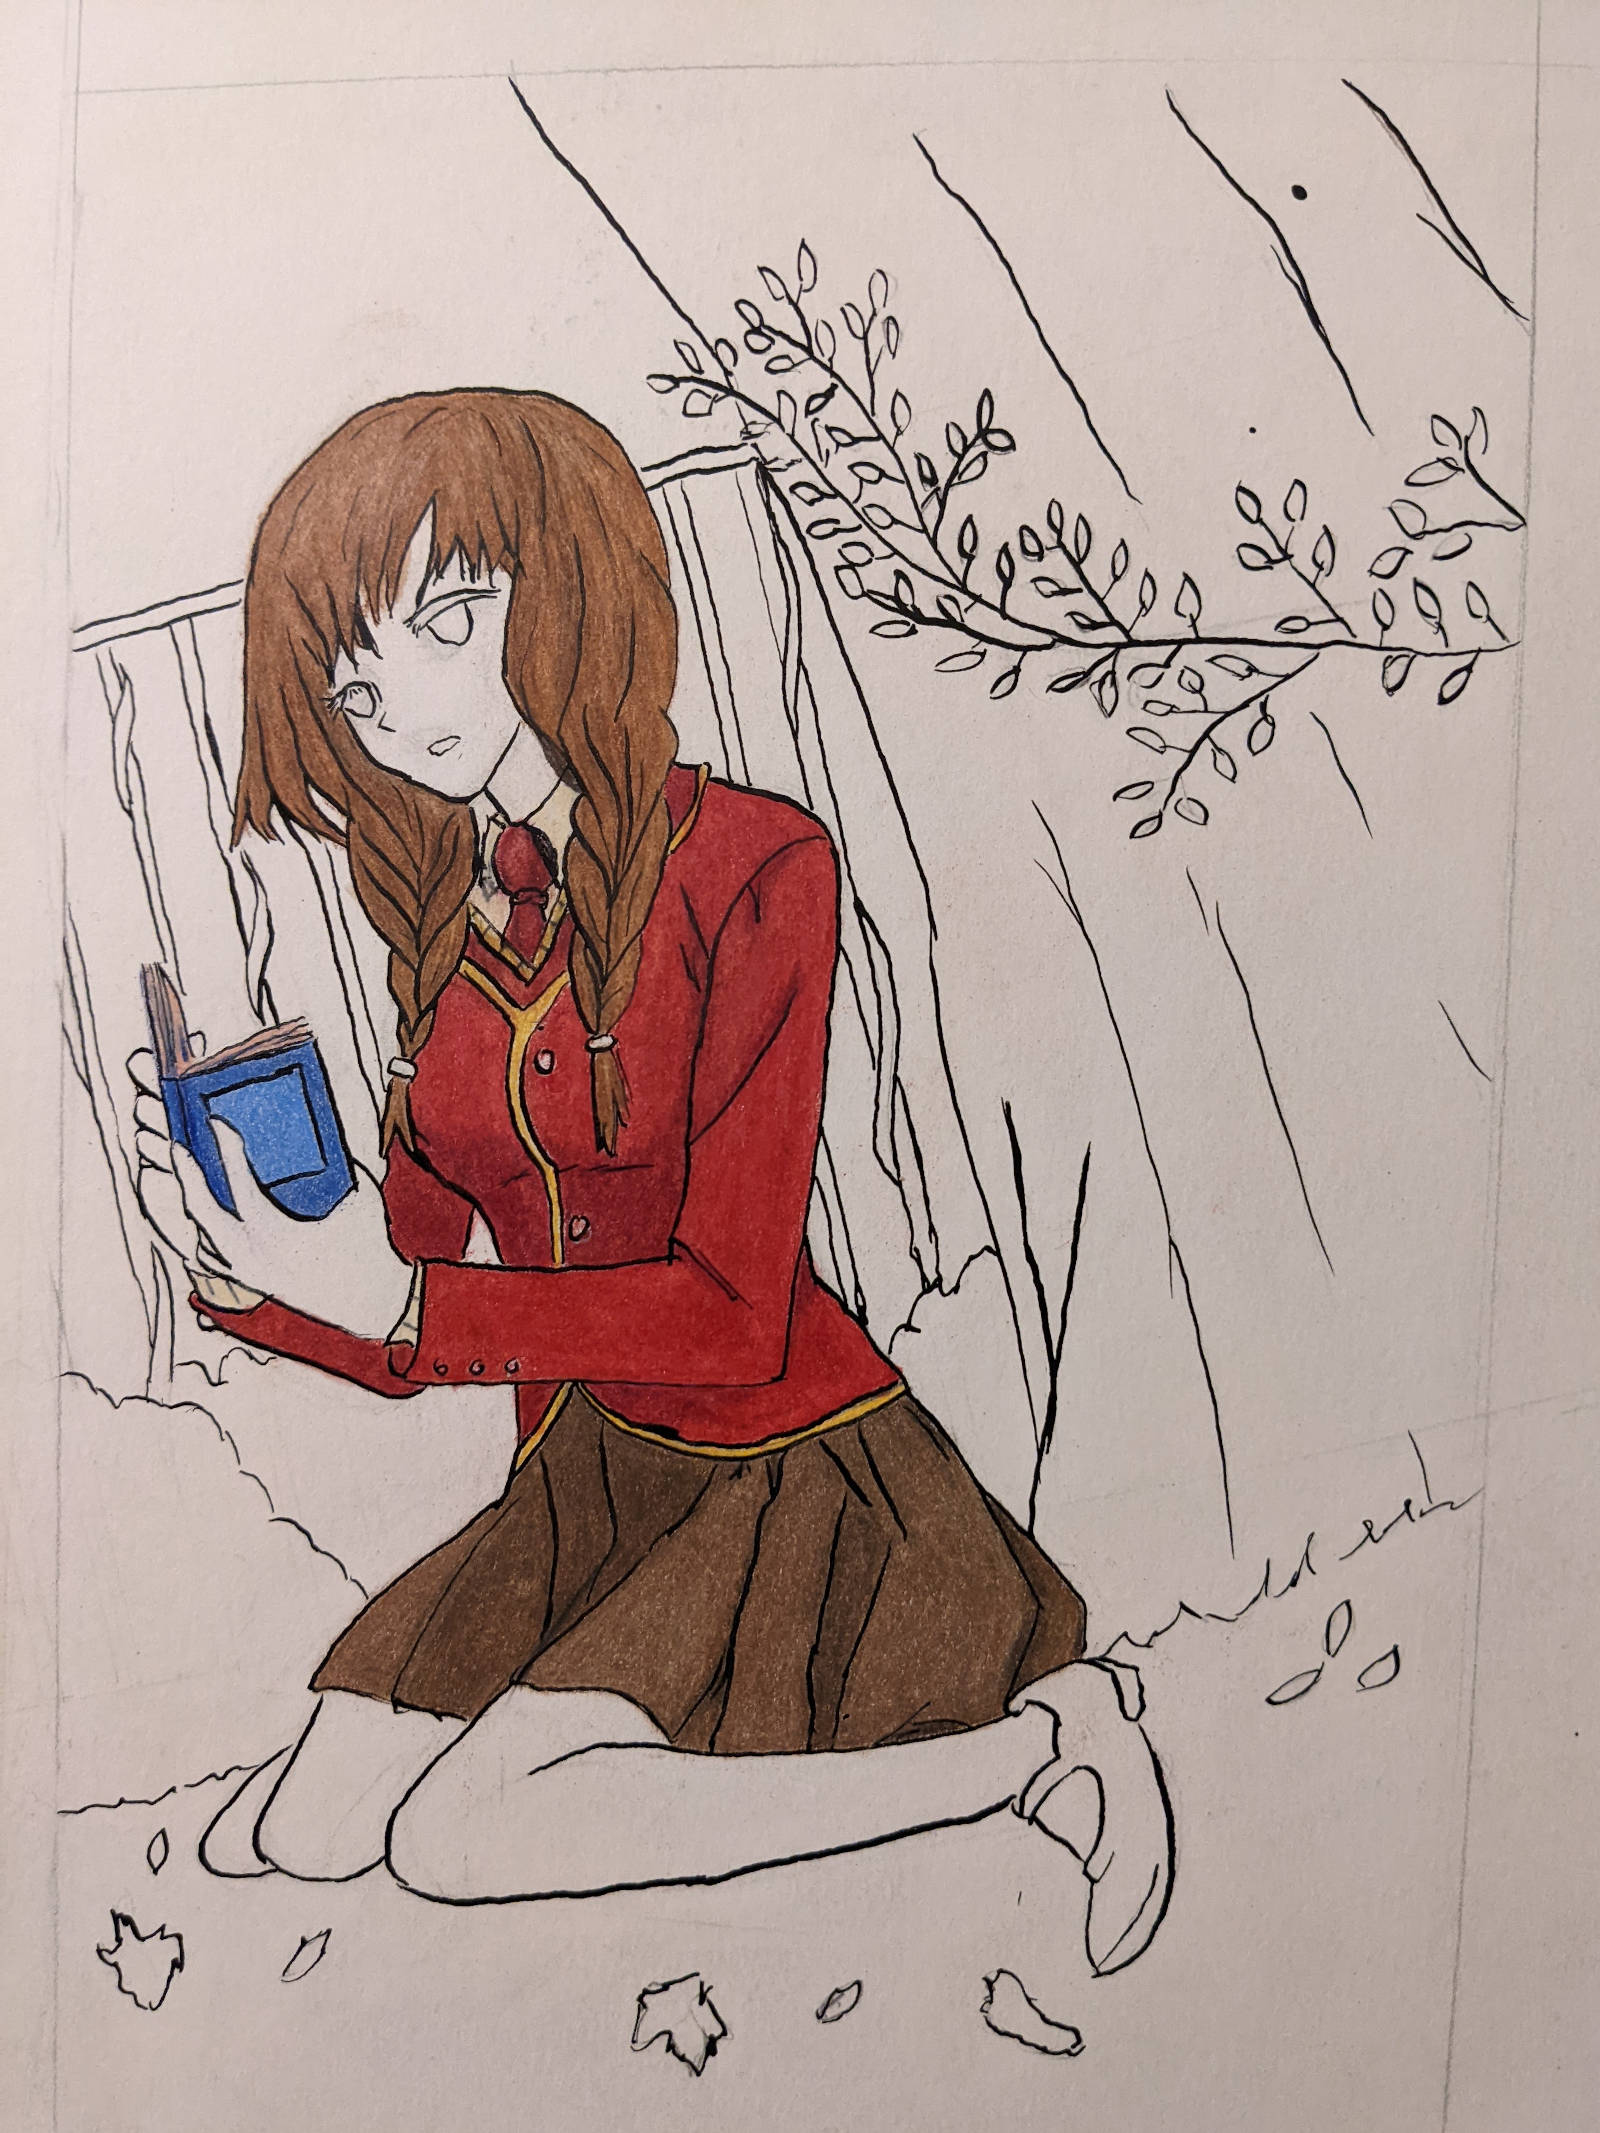 Girl with red blazer and a brown skirt sitting in front of bushes and a fence. A tree is next to her. She is reading a diary. Background is uncolored.